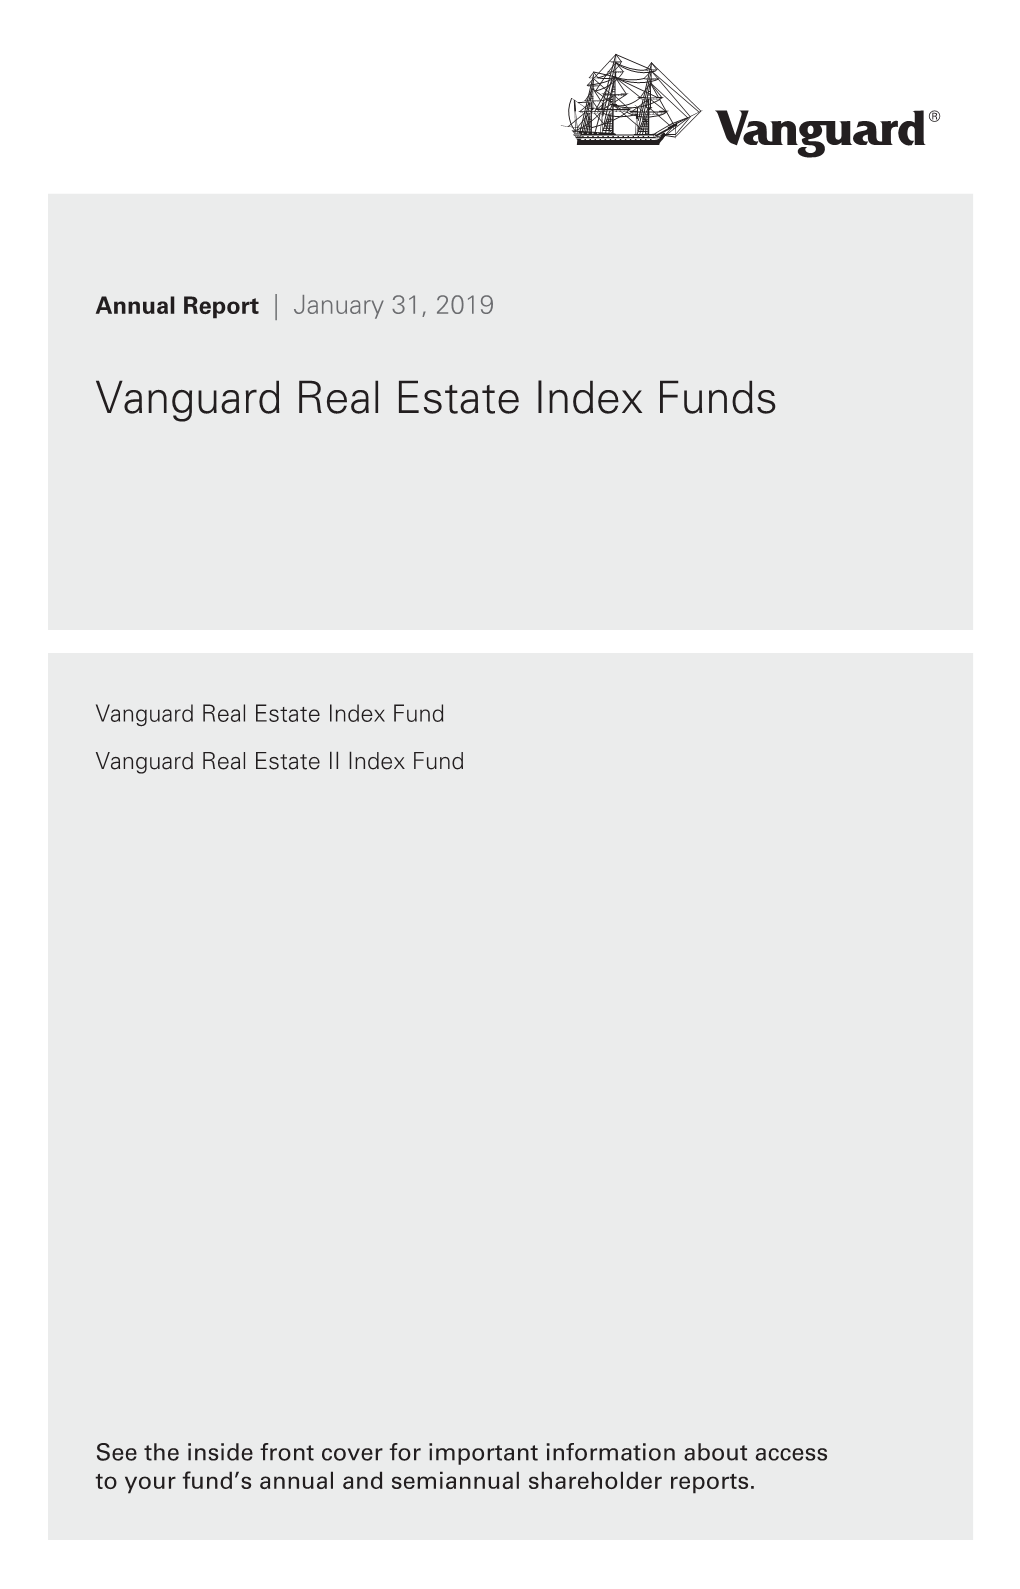 Vanguard Real Estate Index Funds Annual Report January 31, 2019